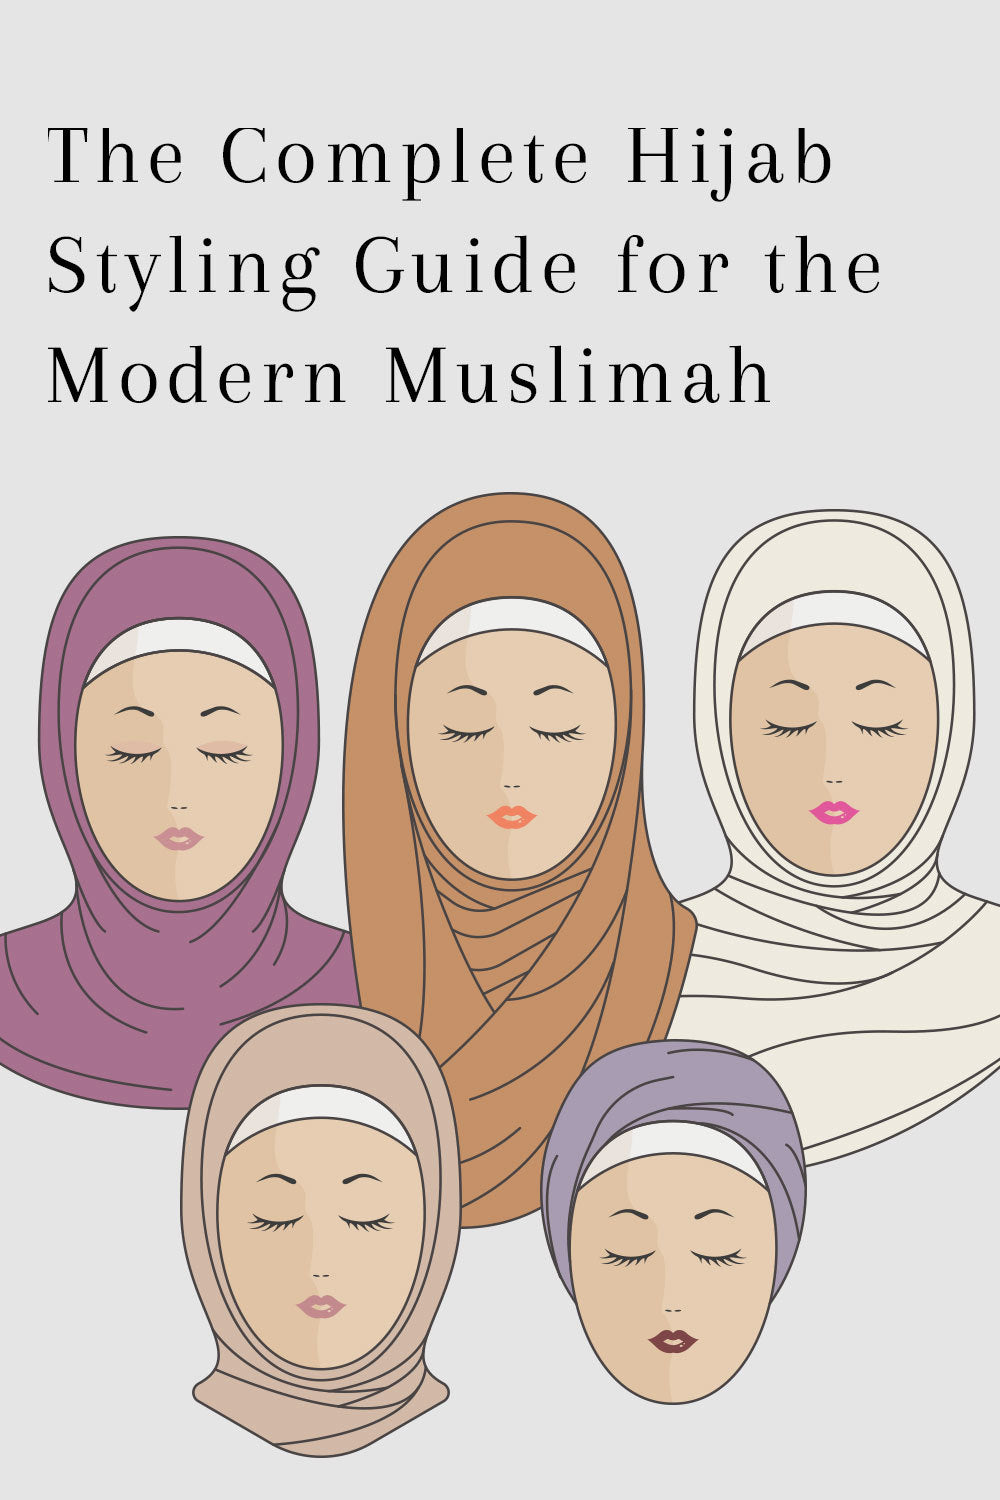 Hijab Styles: The Complete Guide for the Modern Muslimah